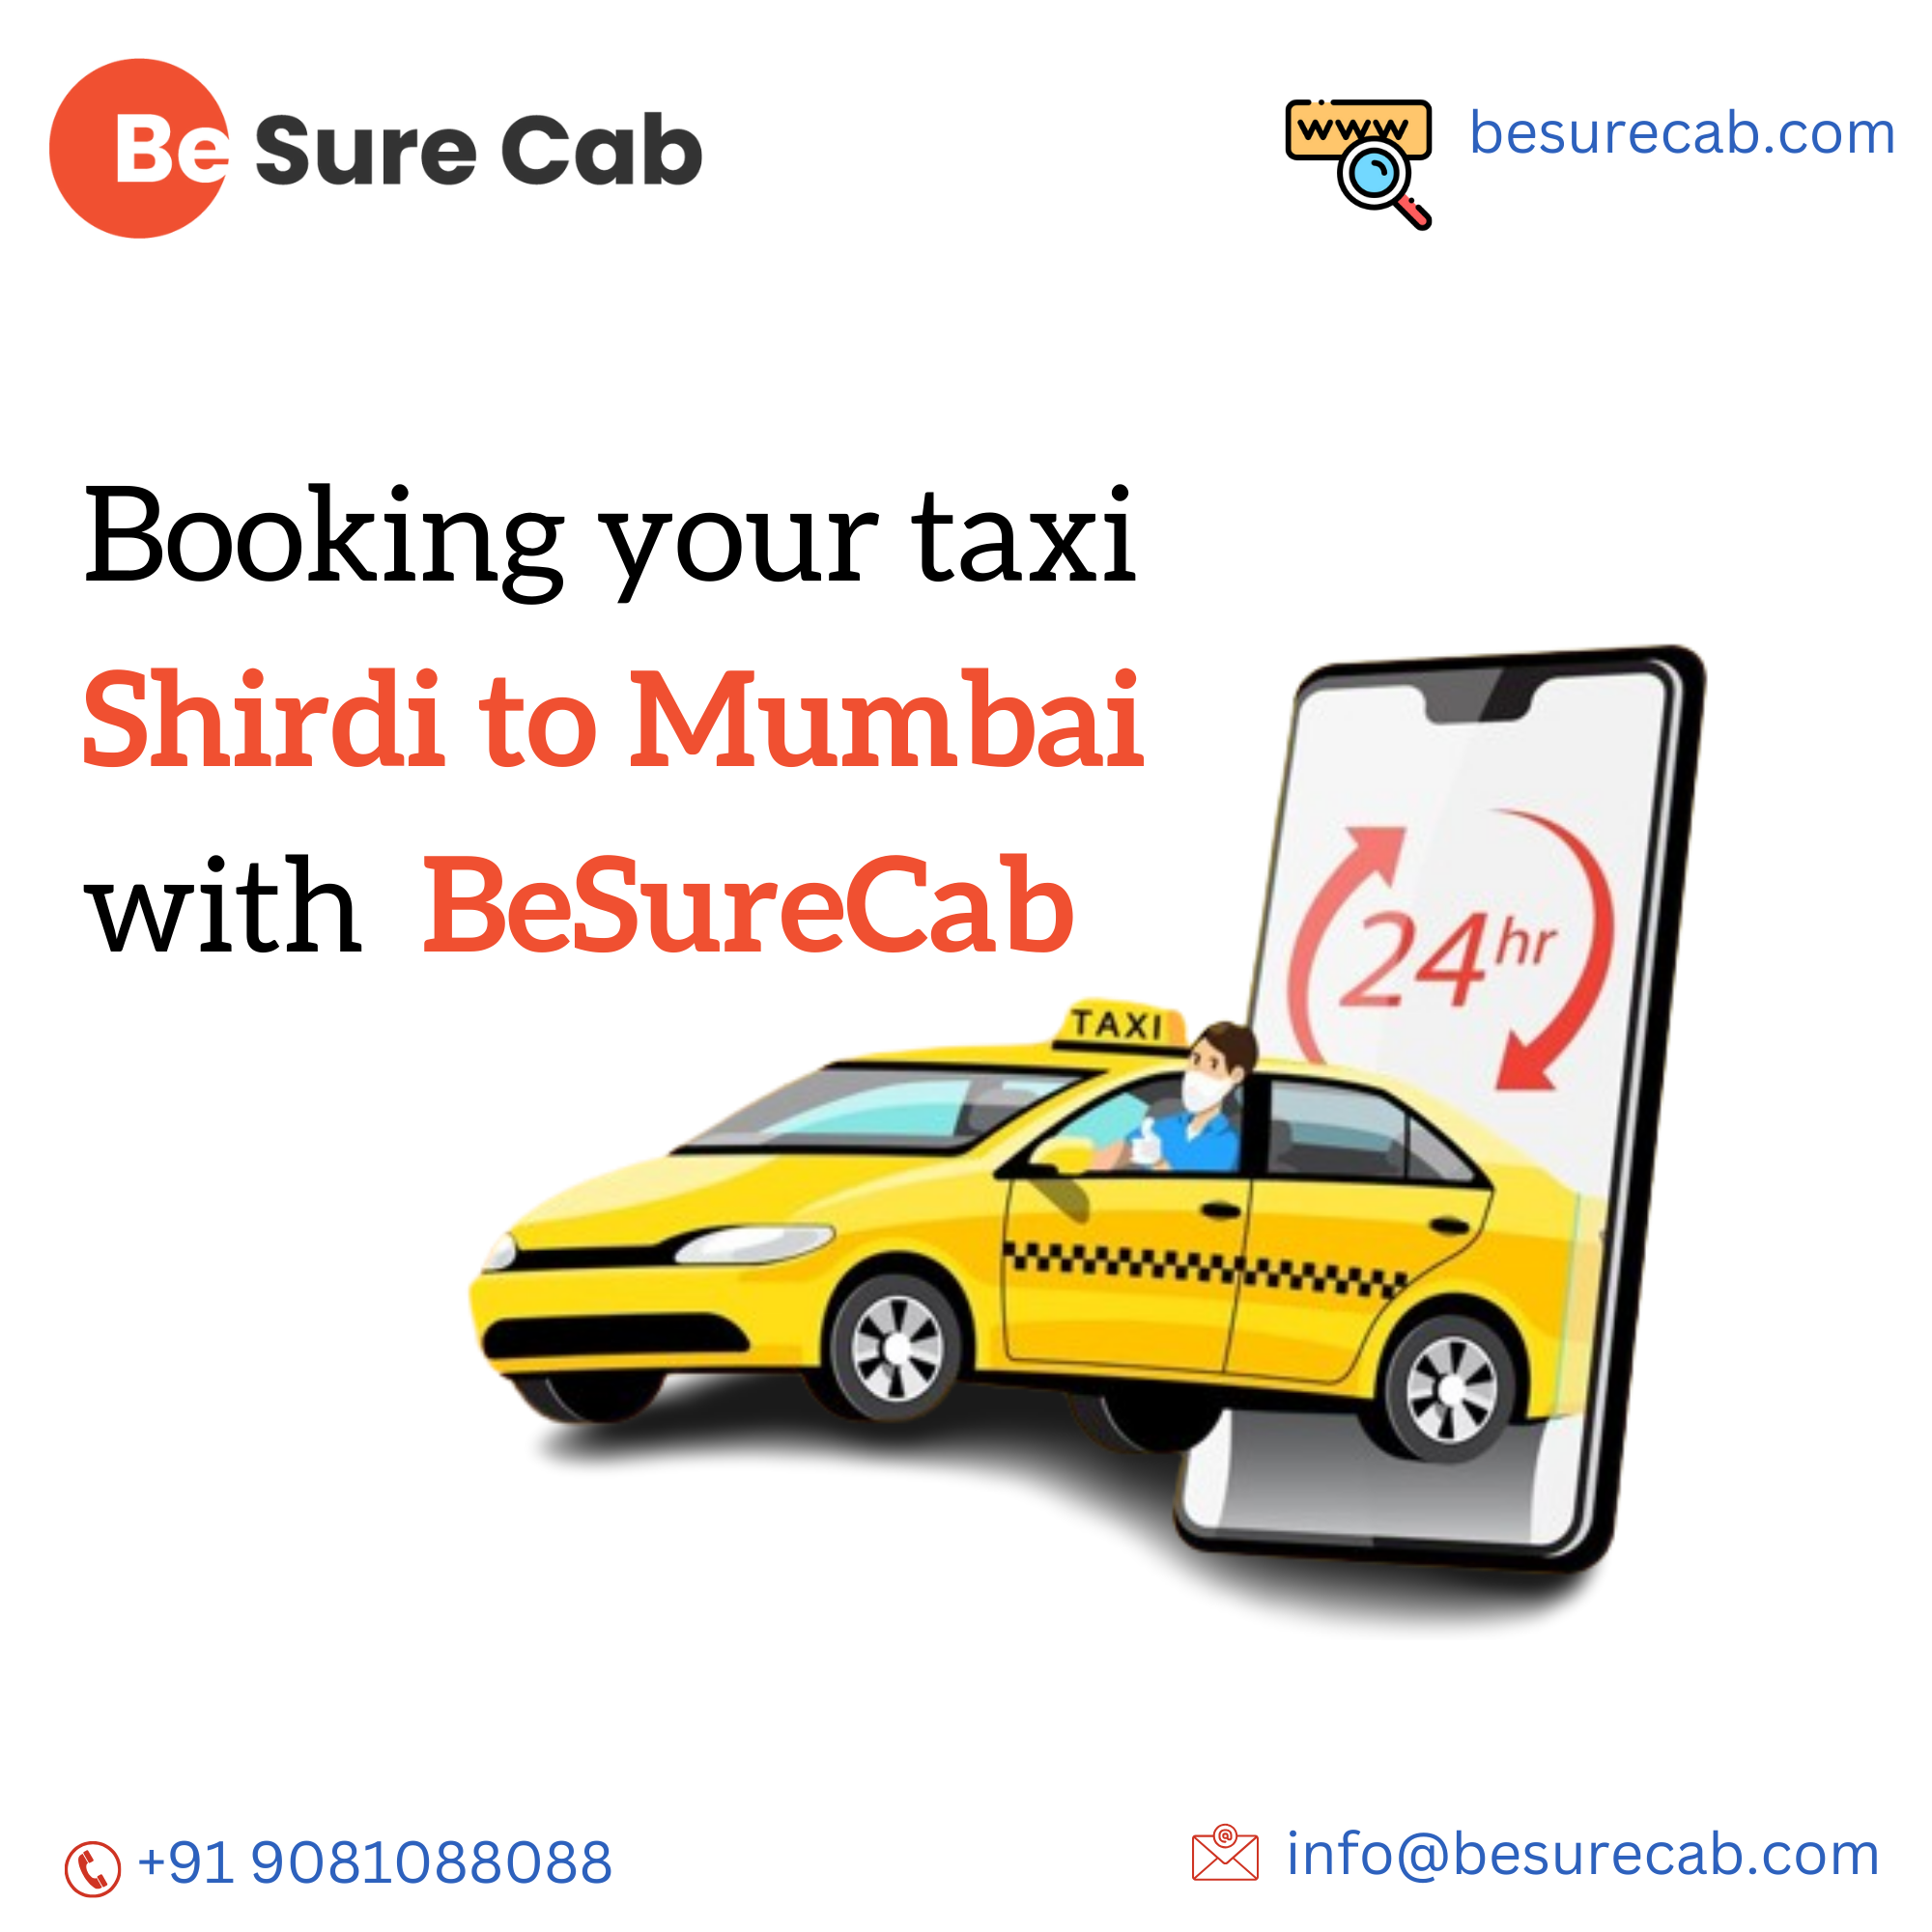 Booking your taxi Shirdi to Mumbai with BeSureCab is easy and will make your trip